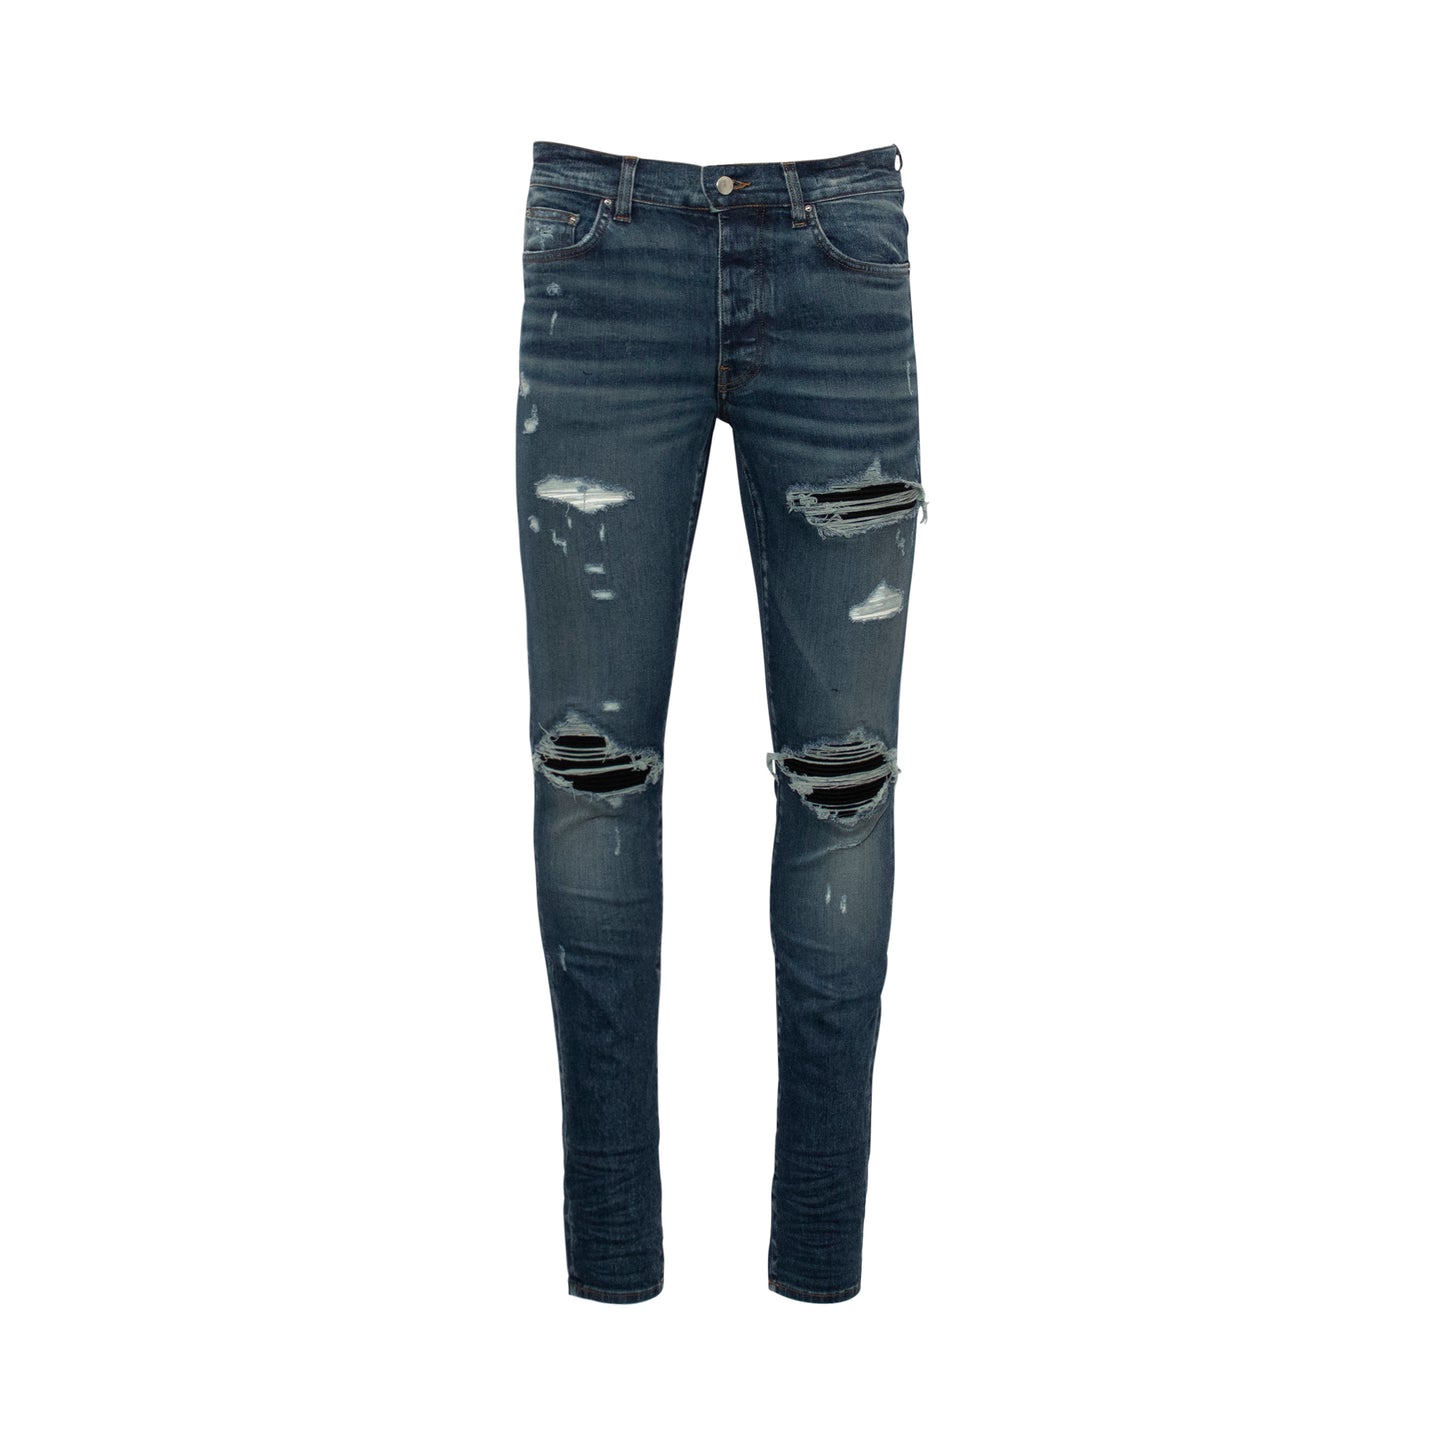 Mx1 Suede Jeans in Blue